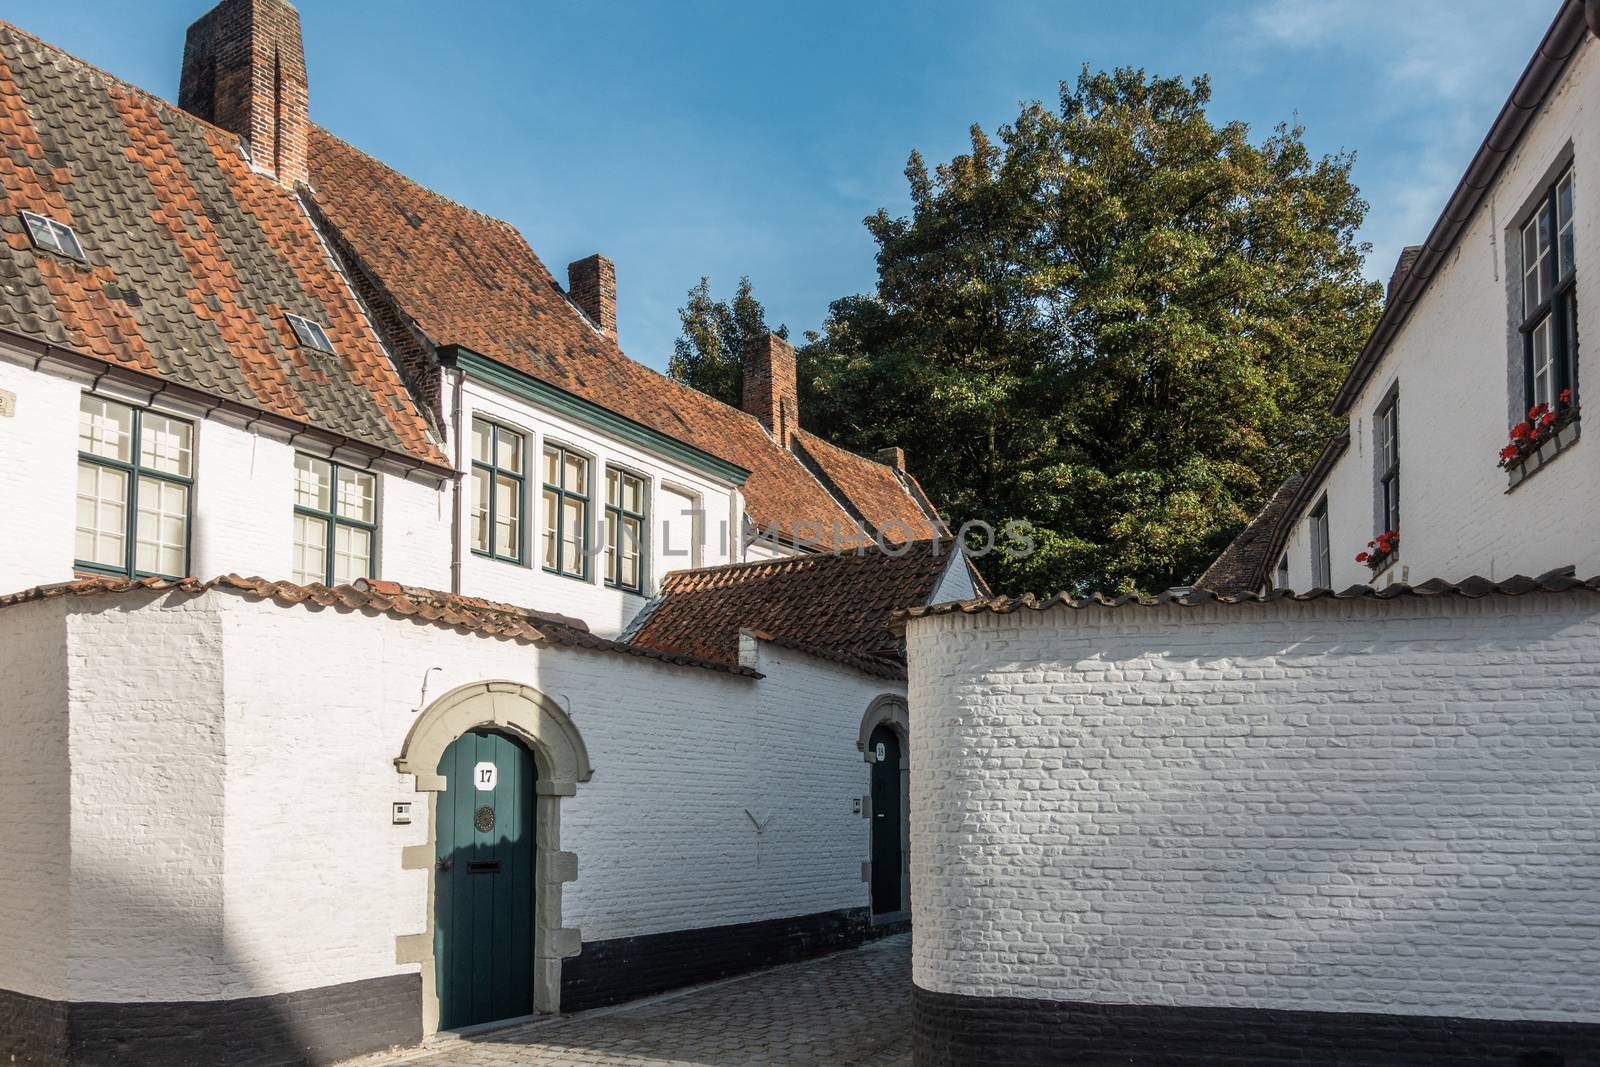 Kortrijk, Flanders, Belgium - September 17, 2018: Corner view of the beguinage with white and red roofed housing. Gray courtyard. Some green foliage.